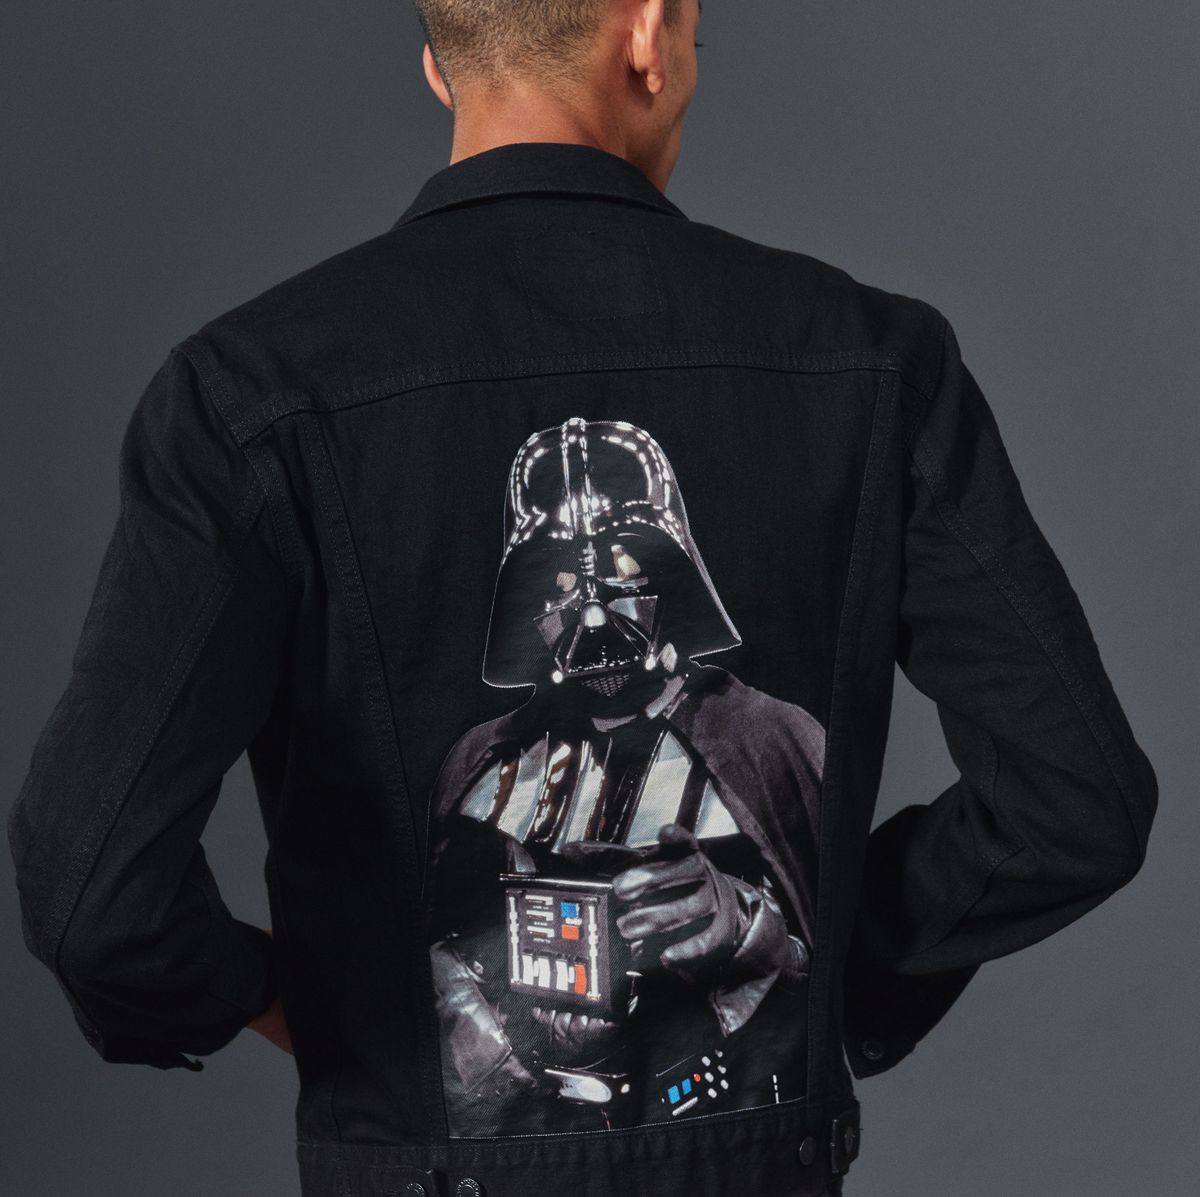 Levi's Will Collaborate With 'Star Wars' This November